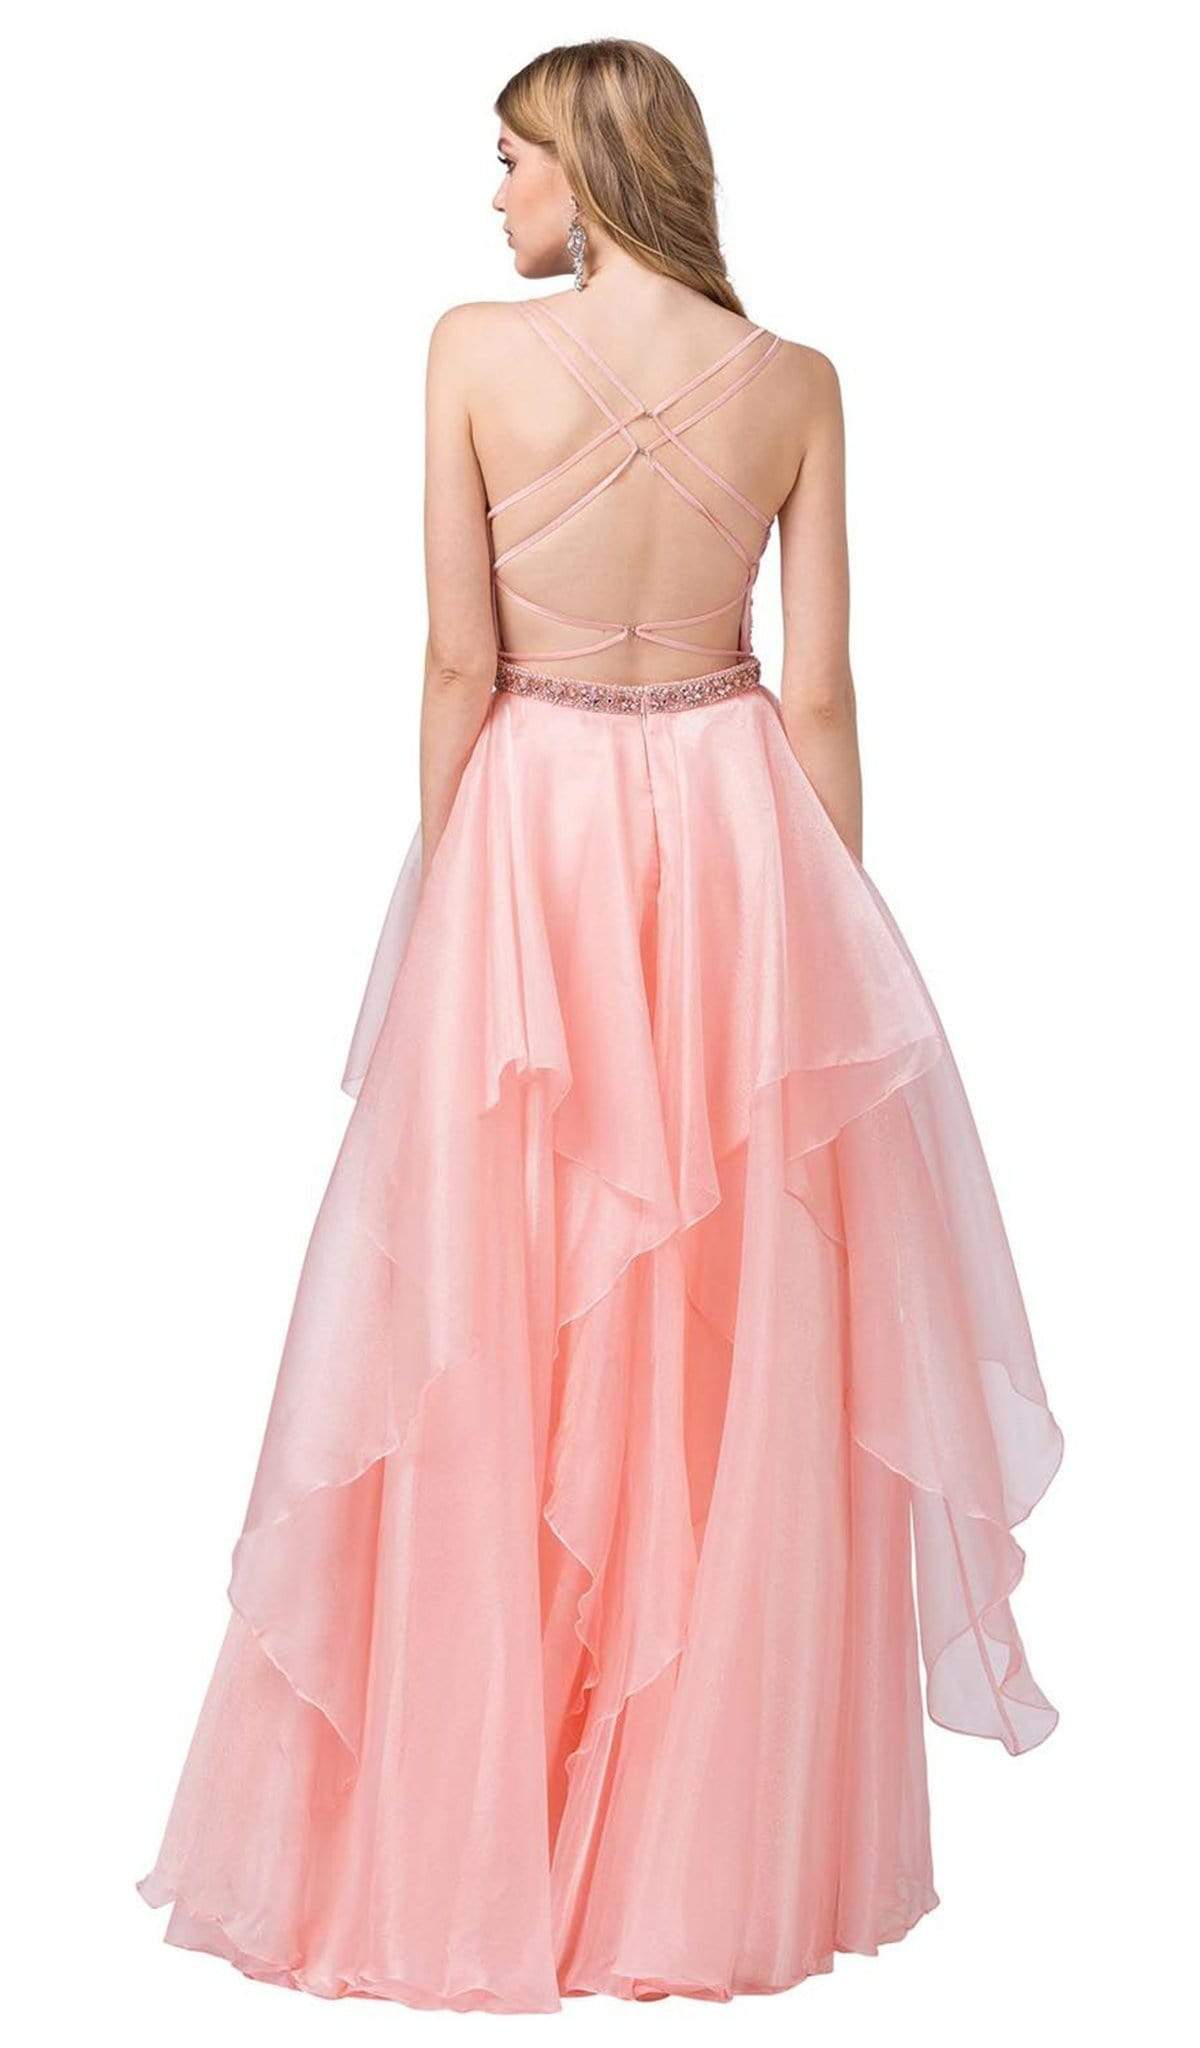 Dancing Queen - 2524 Embellished Halter V-neck Tiered Ballgown Special Occasion Dress